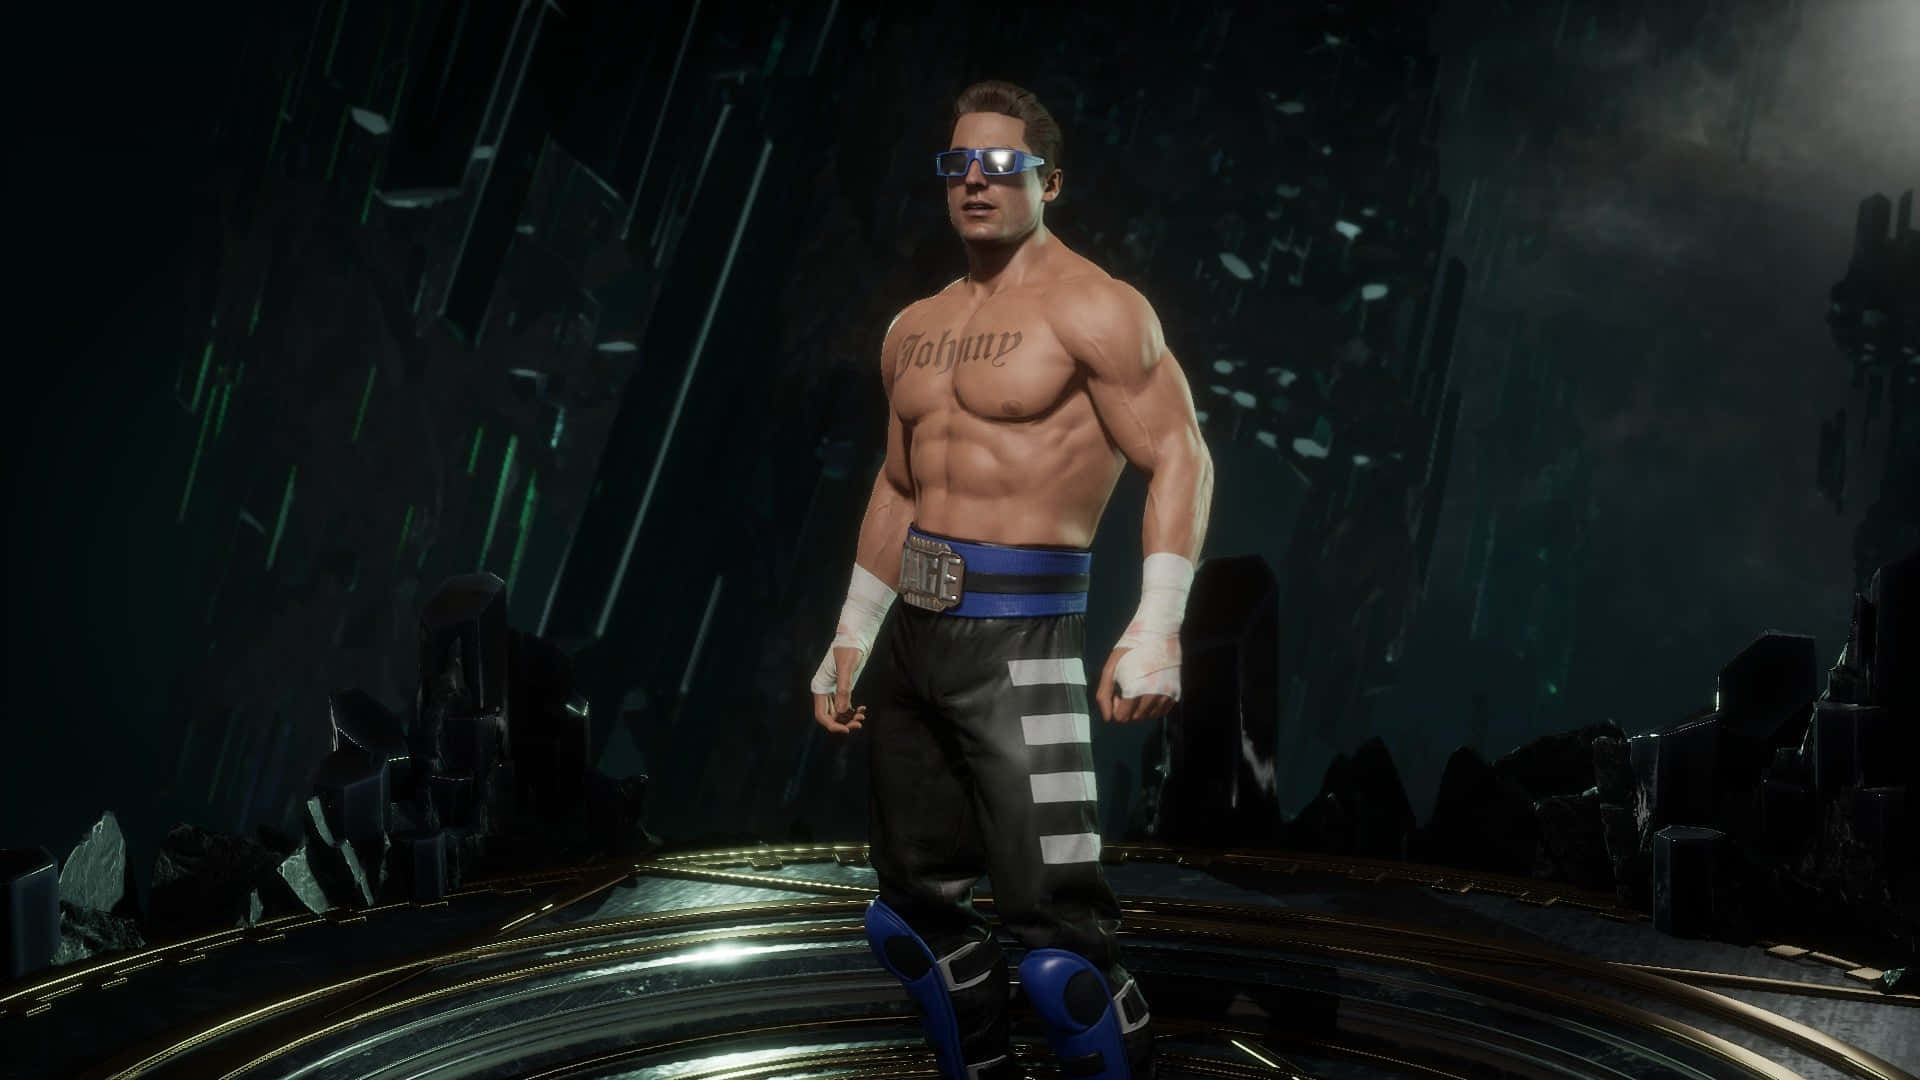 Johnny Cage in a dynamic fighting pose with his signature sunglasses. Wallpaper